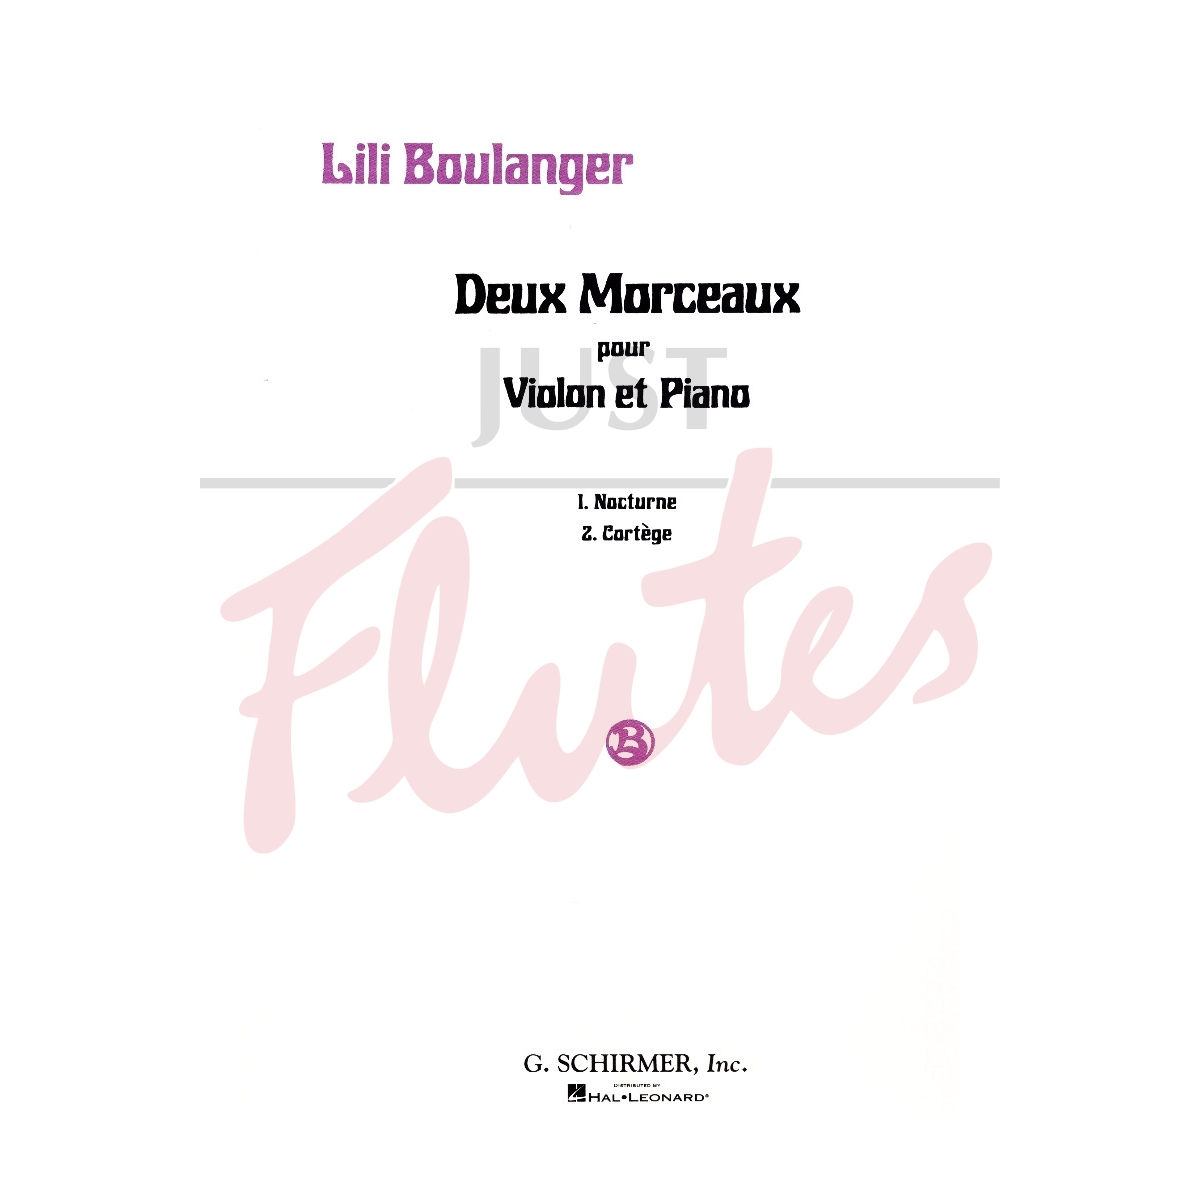 Deux Morceaux for Violin and Piano